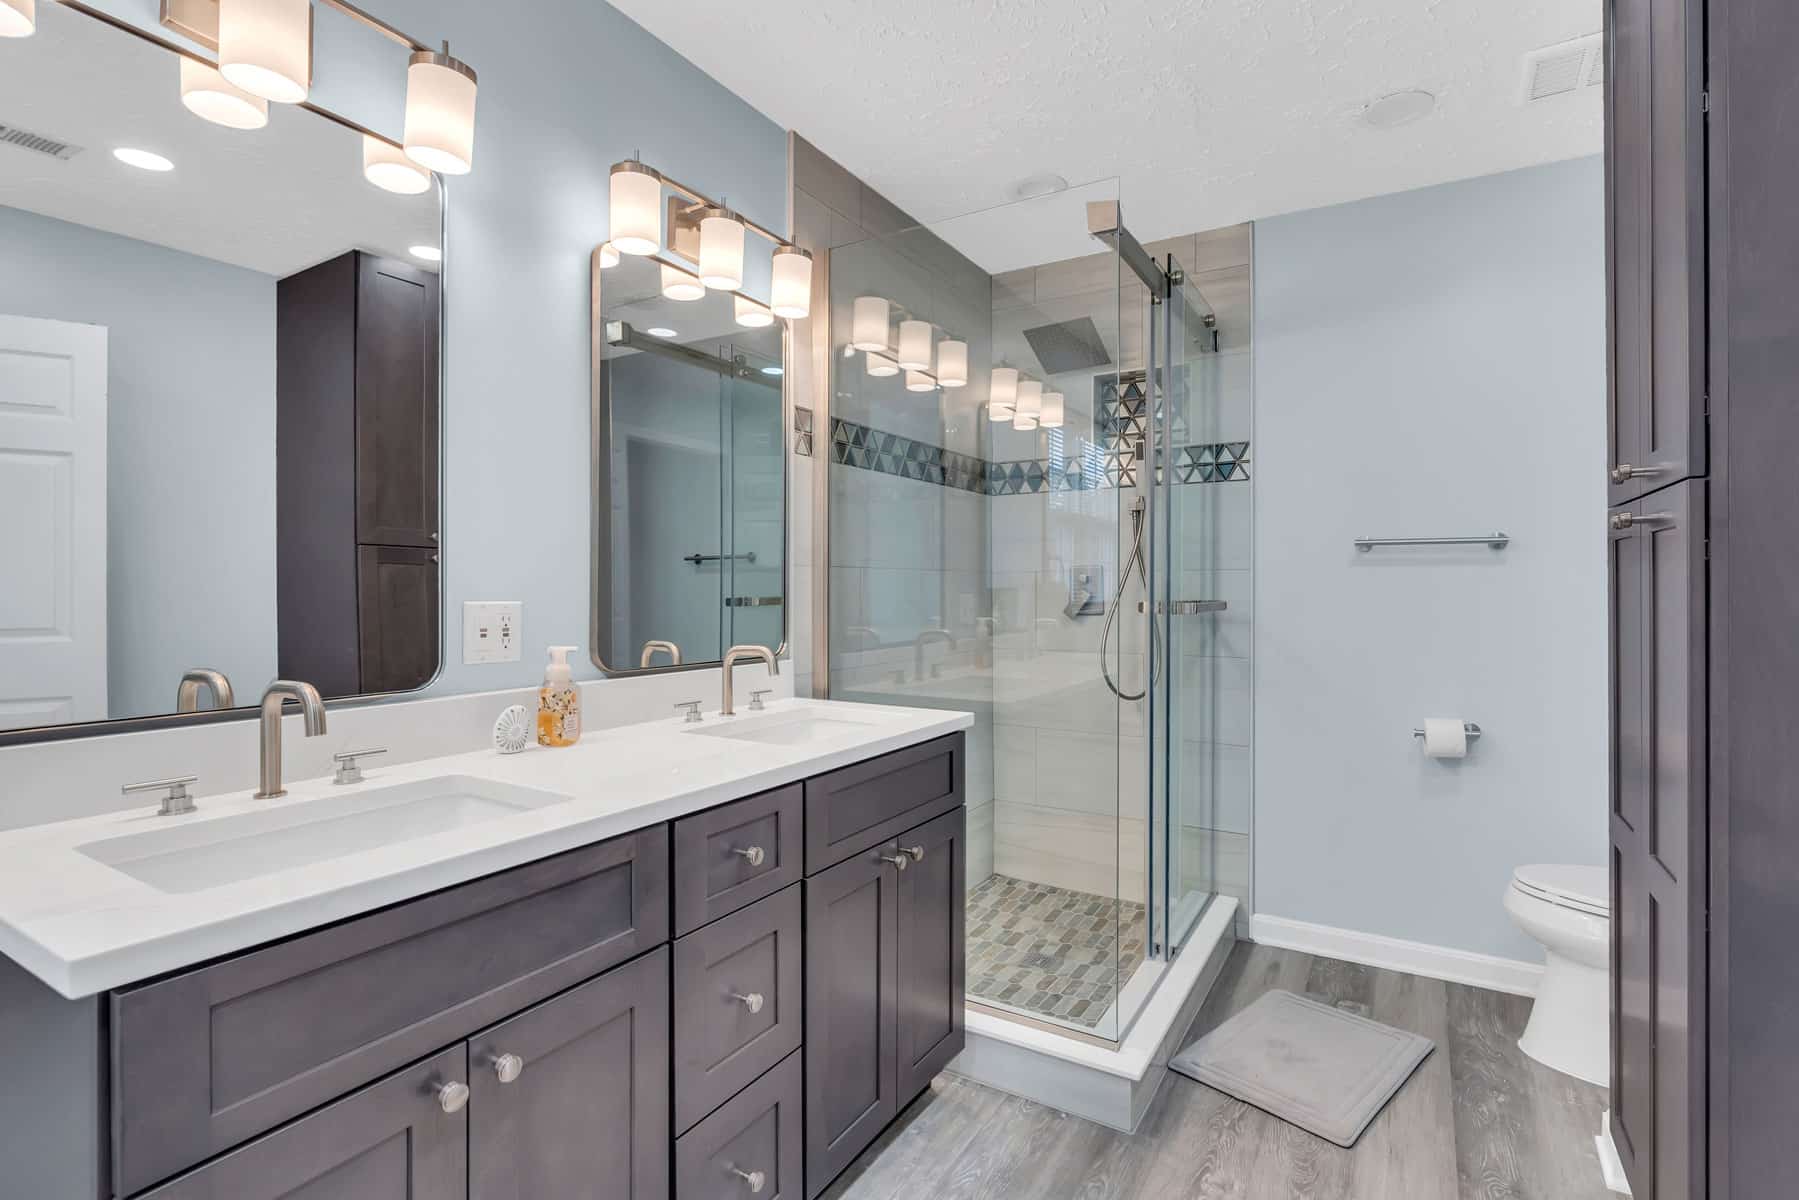 Elegant bathroom project in waldorf with gray shaker vanity, shower, and toilet